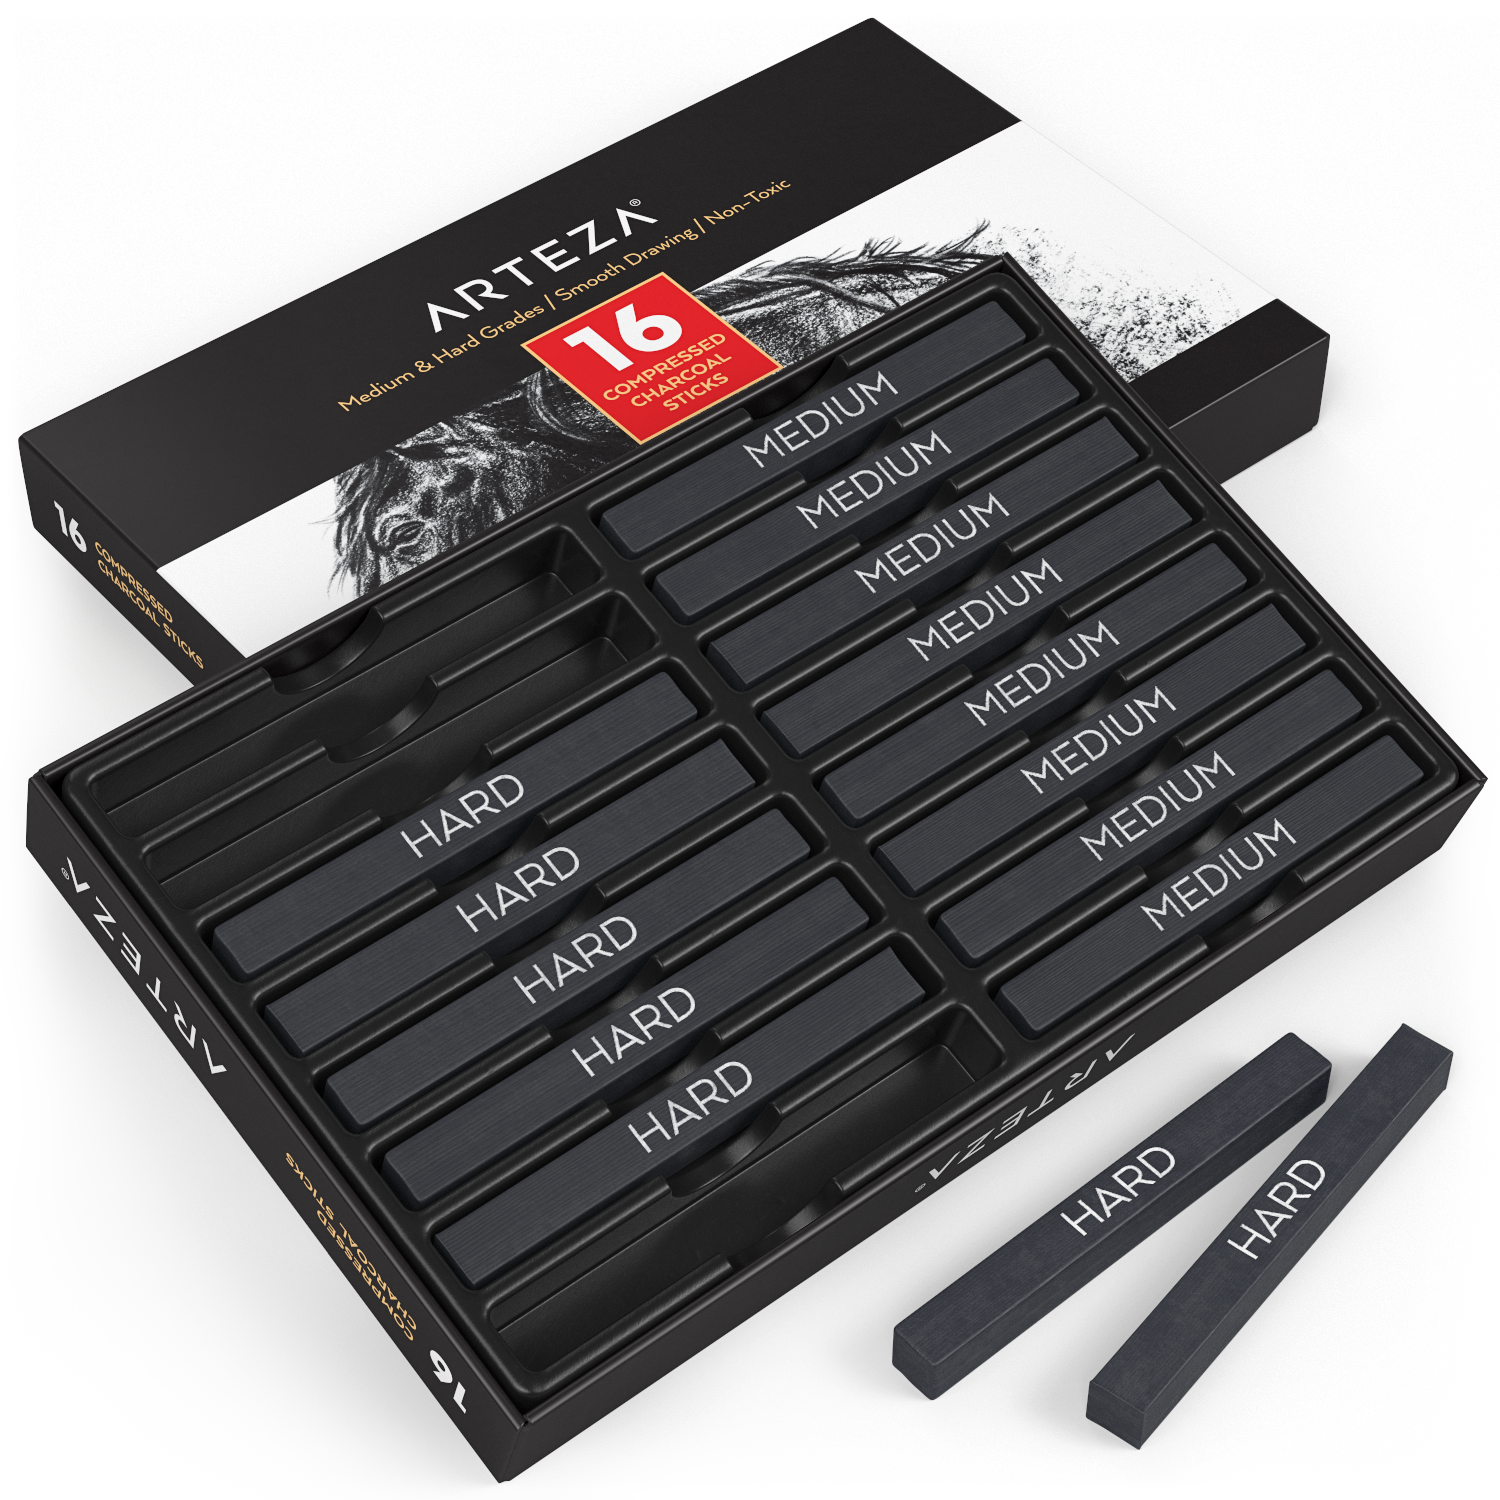 Professional Charcoal Drawing Set, 16 Pieces